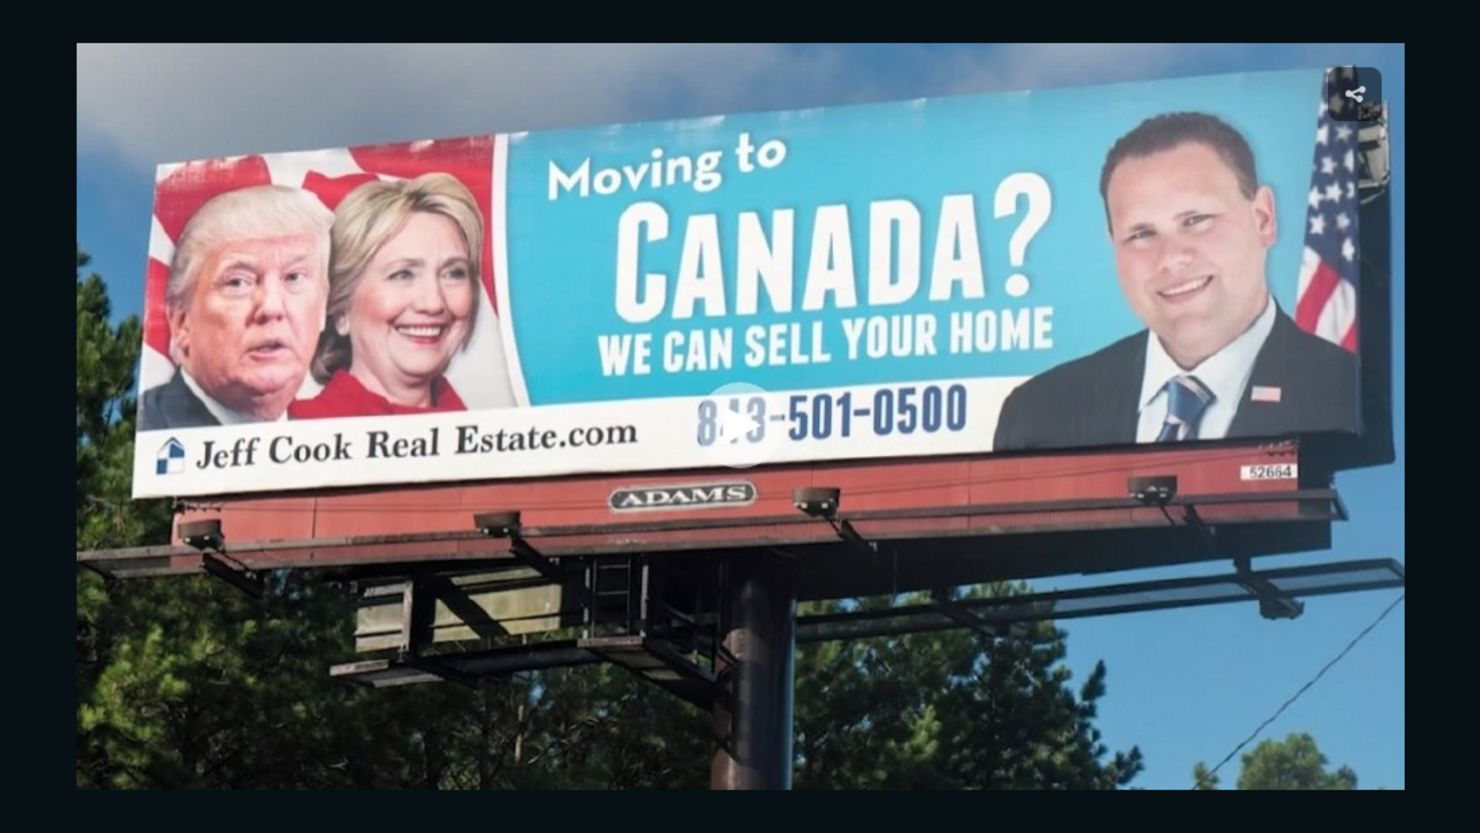 A South Carolina realtor's sign offers help to those who want to move to Canada because of the election results.